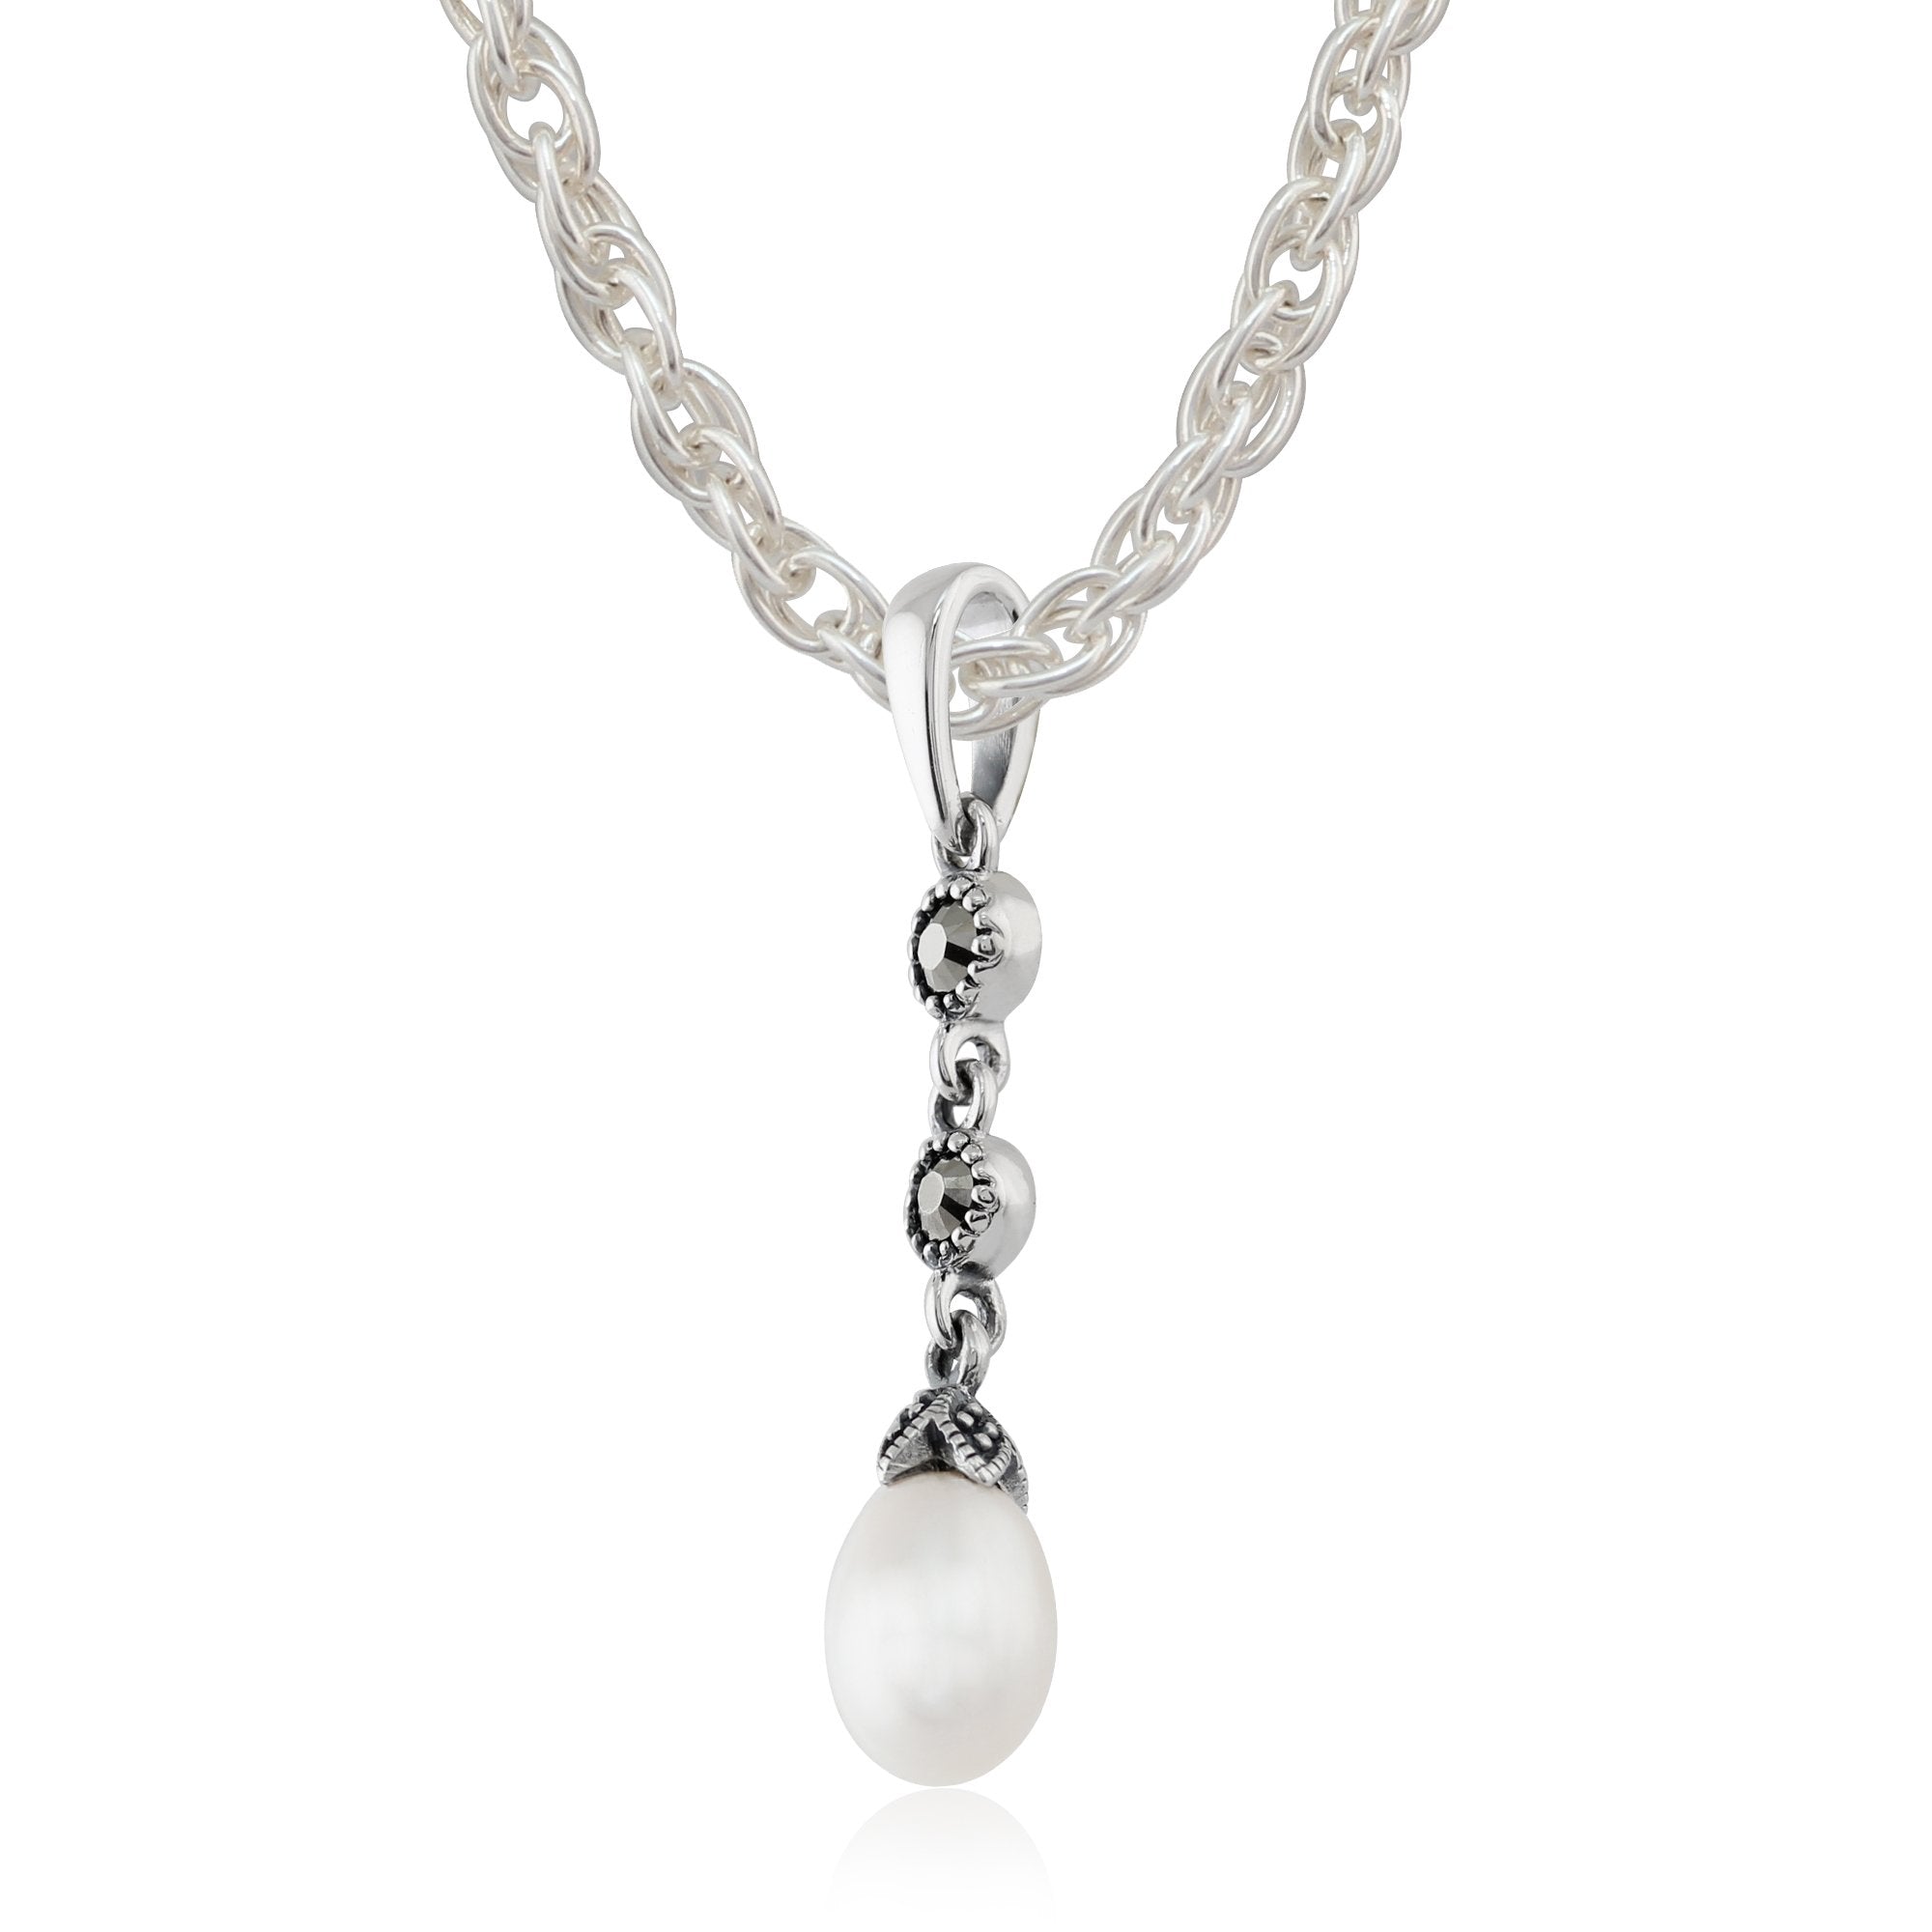 Art Nouveau Style Freshwater Pearl & Marcasite Pendant in 925 Sterling Silver